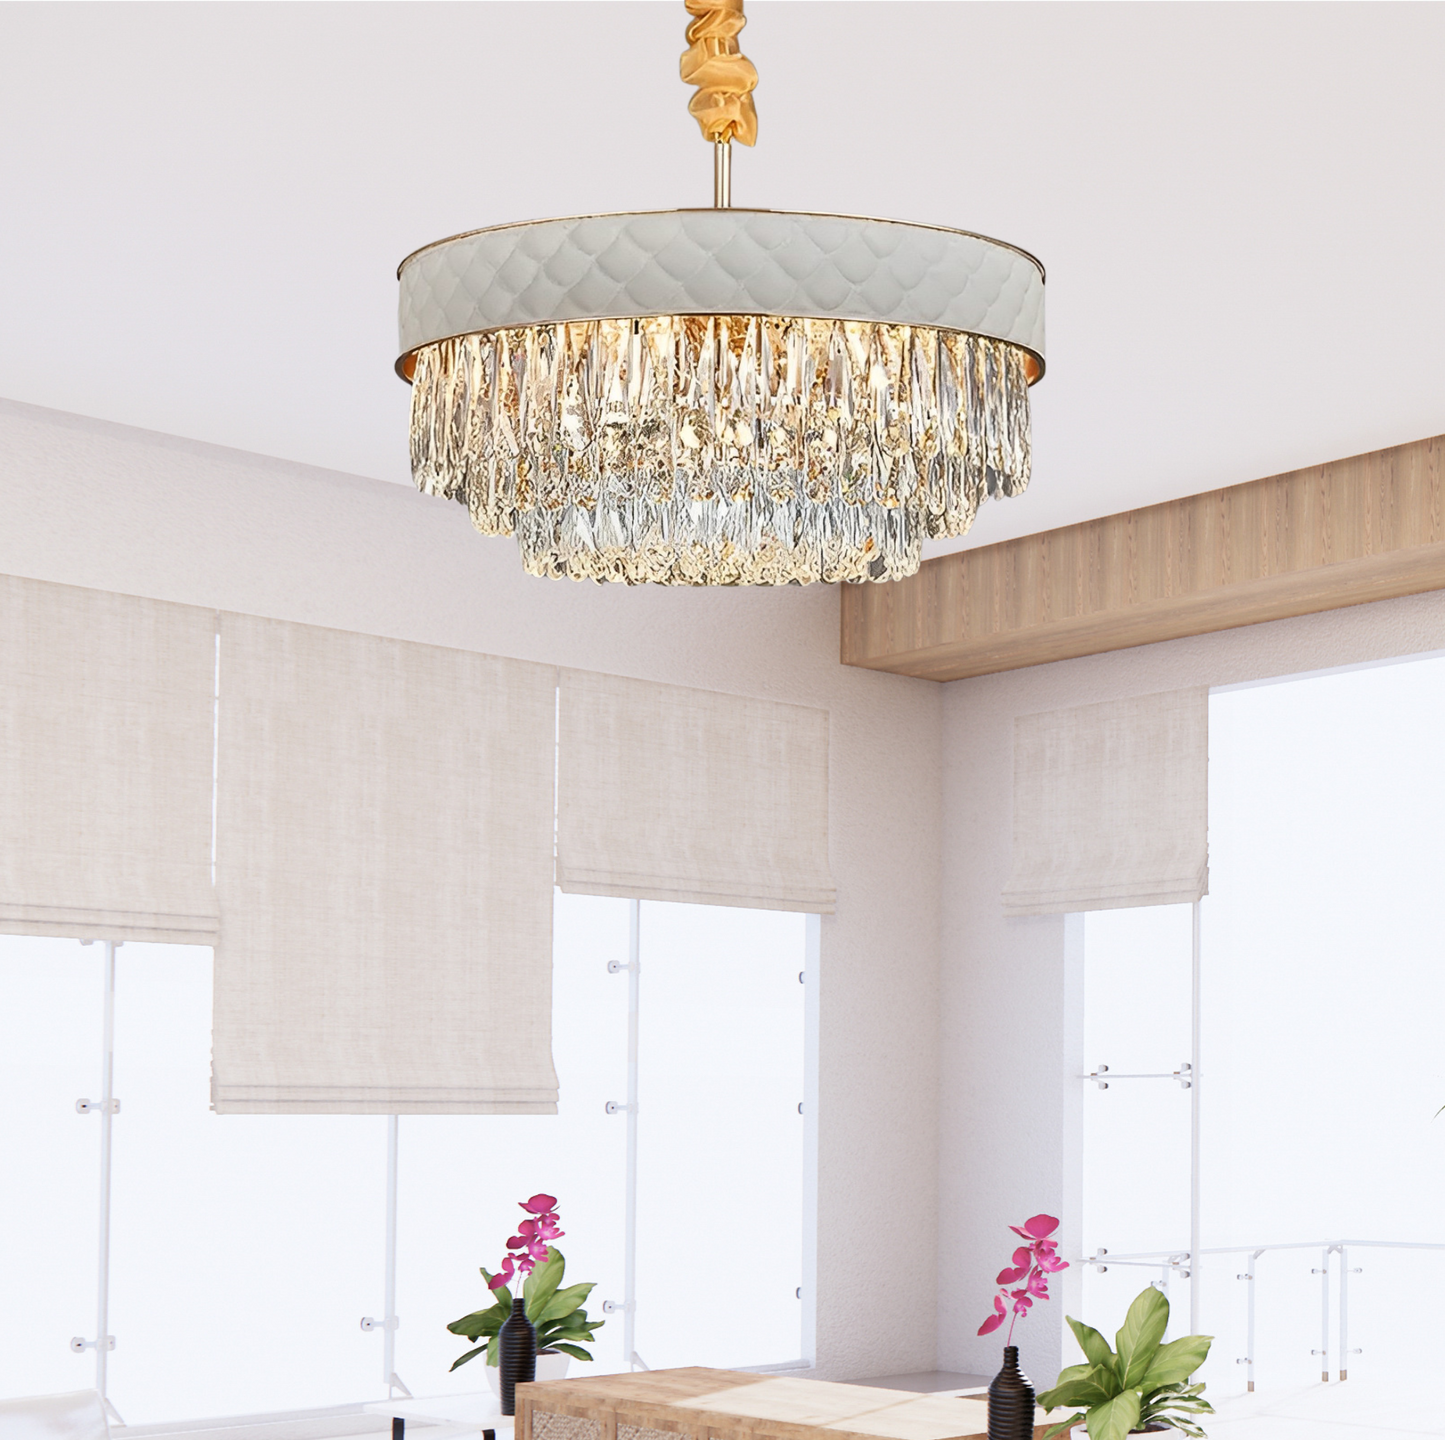 Load image into Gallery viewer, Regal Opulence Crystal Chandelier by Gloss (SR88205/60)
